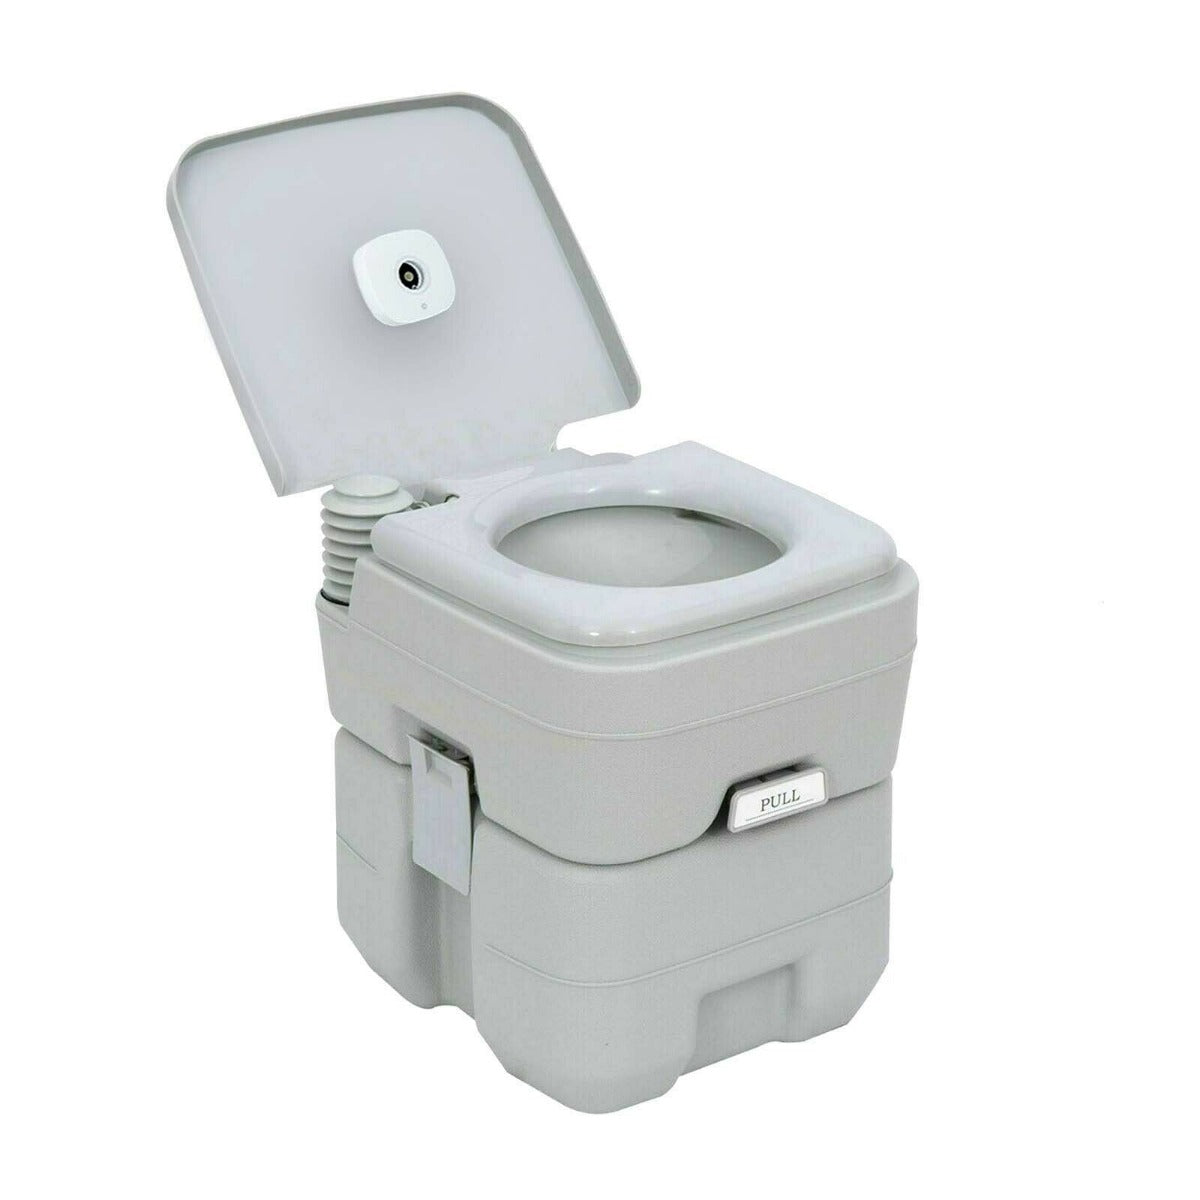 Portable 20L Camping Travel Toilet Compact Potty Loo with UVC Smart Sterilizer